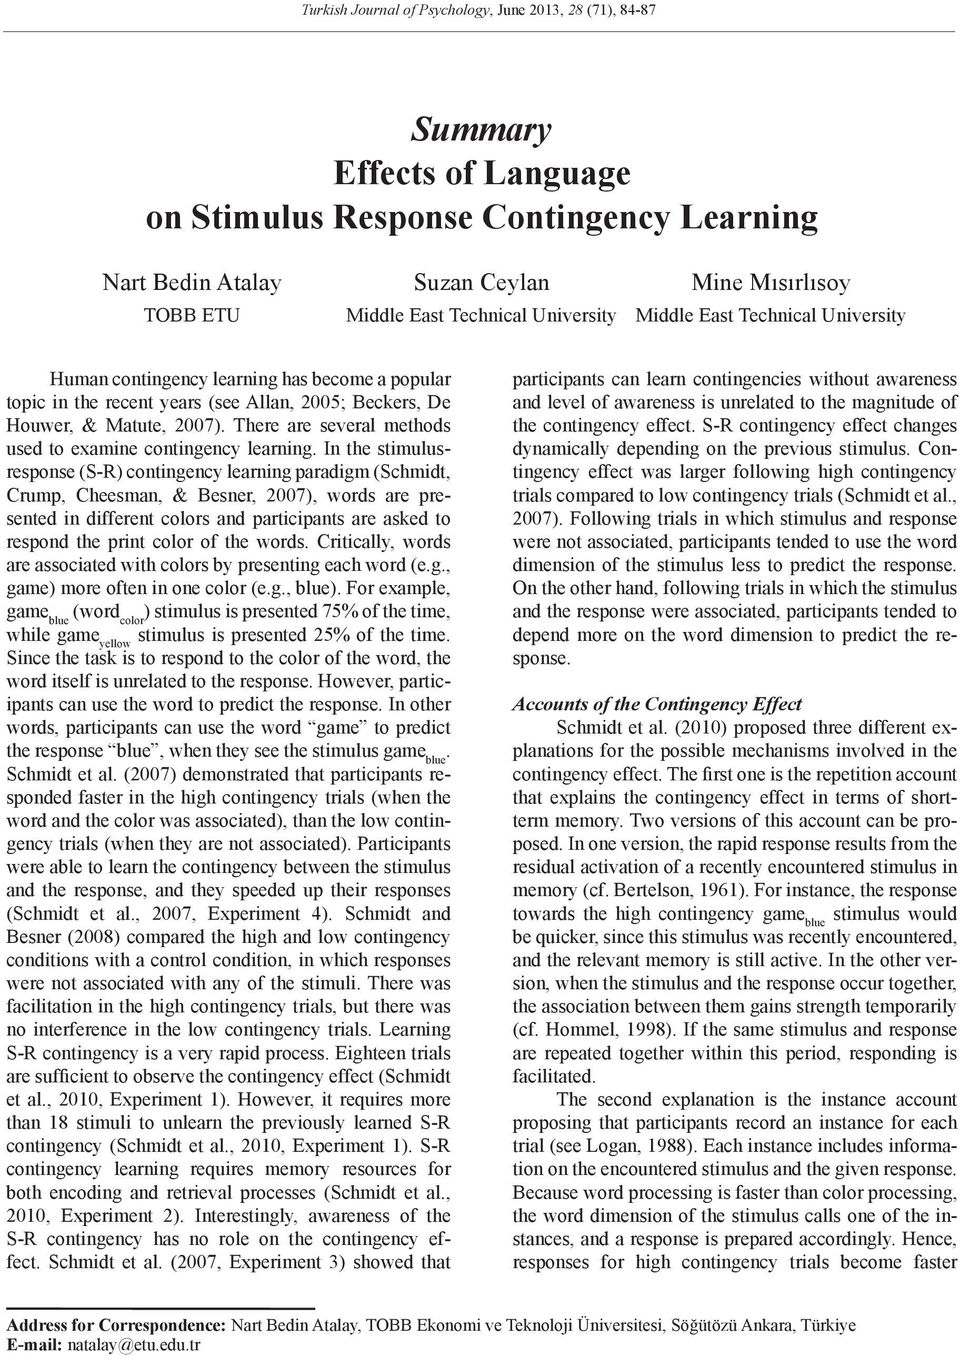 There are several methods used to examine contingency learning.